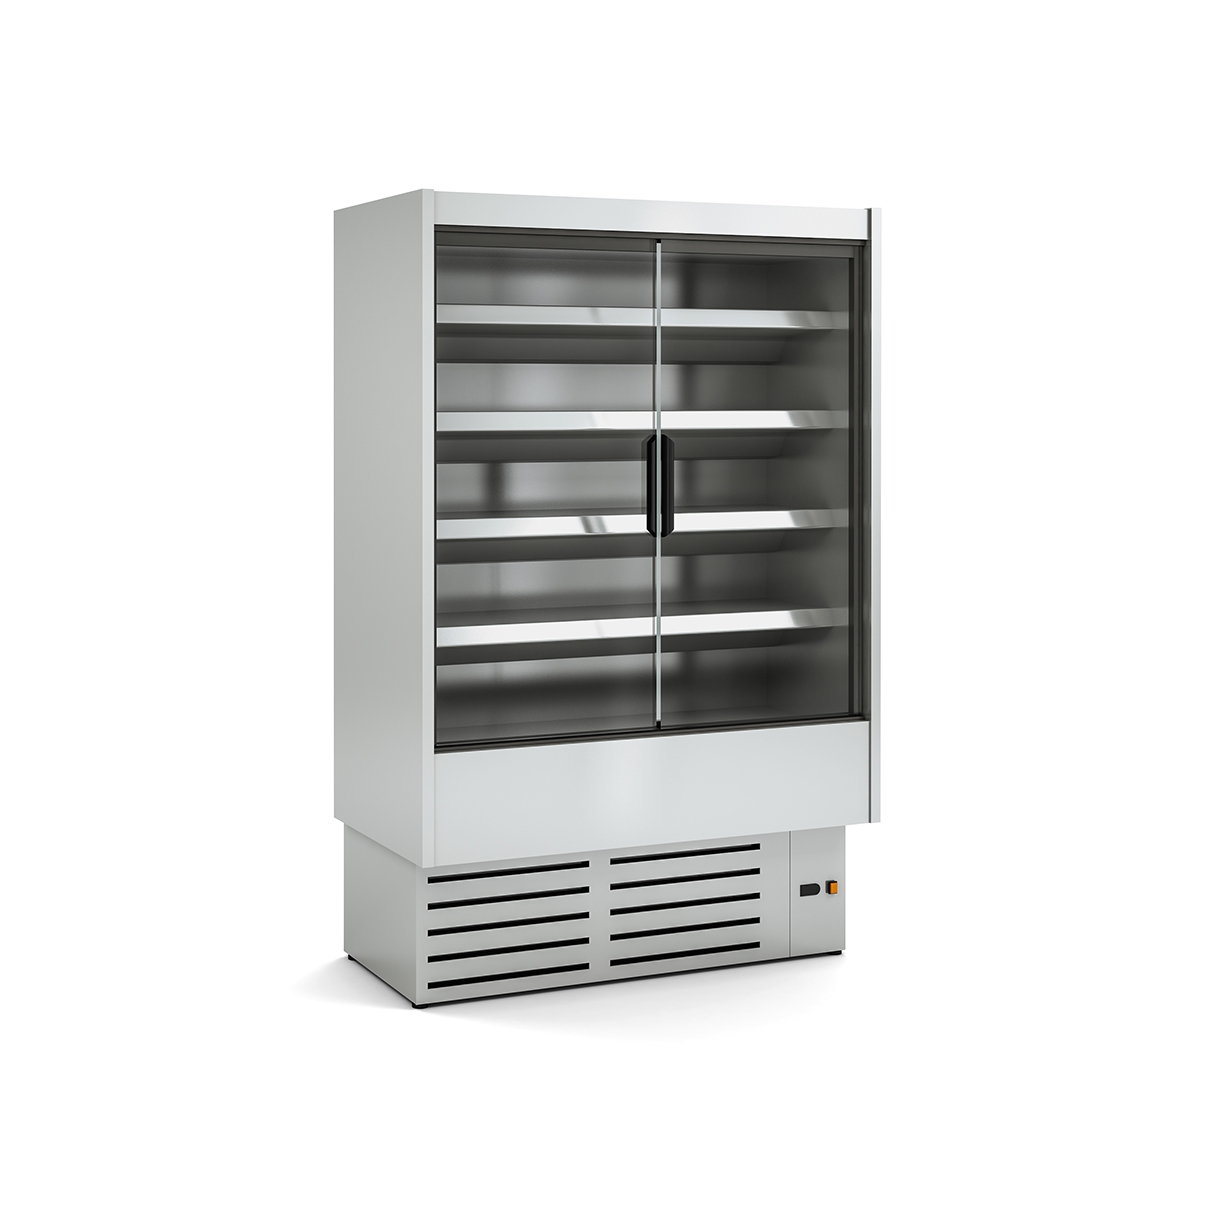 copy of REFRIGERATED WALL-MOUNTED DISPLAY CABINET DG1 I M1-M2